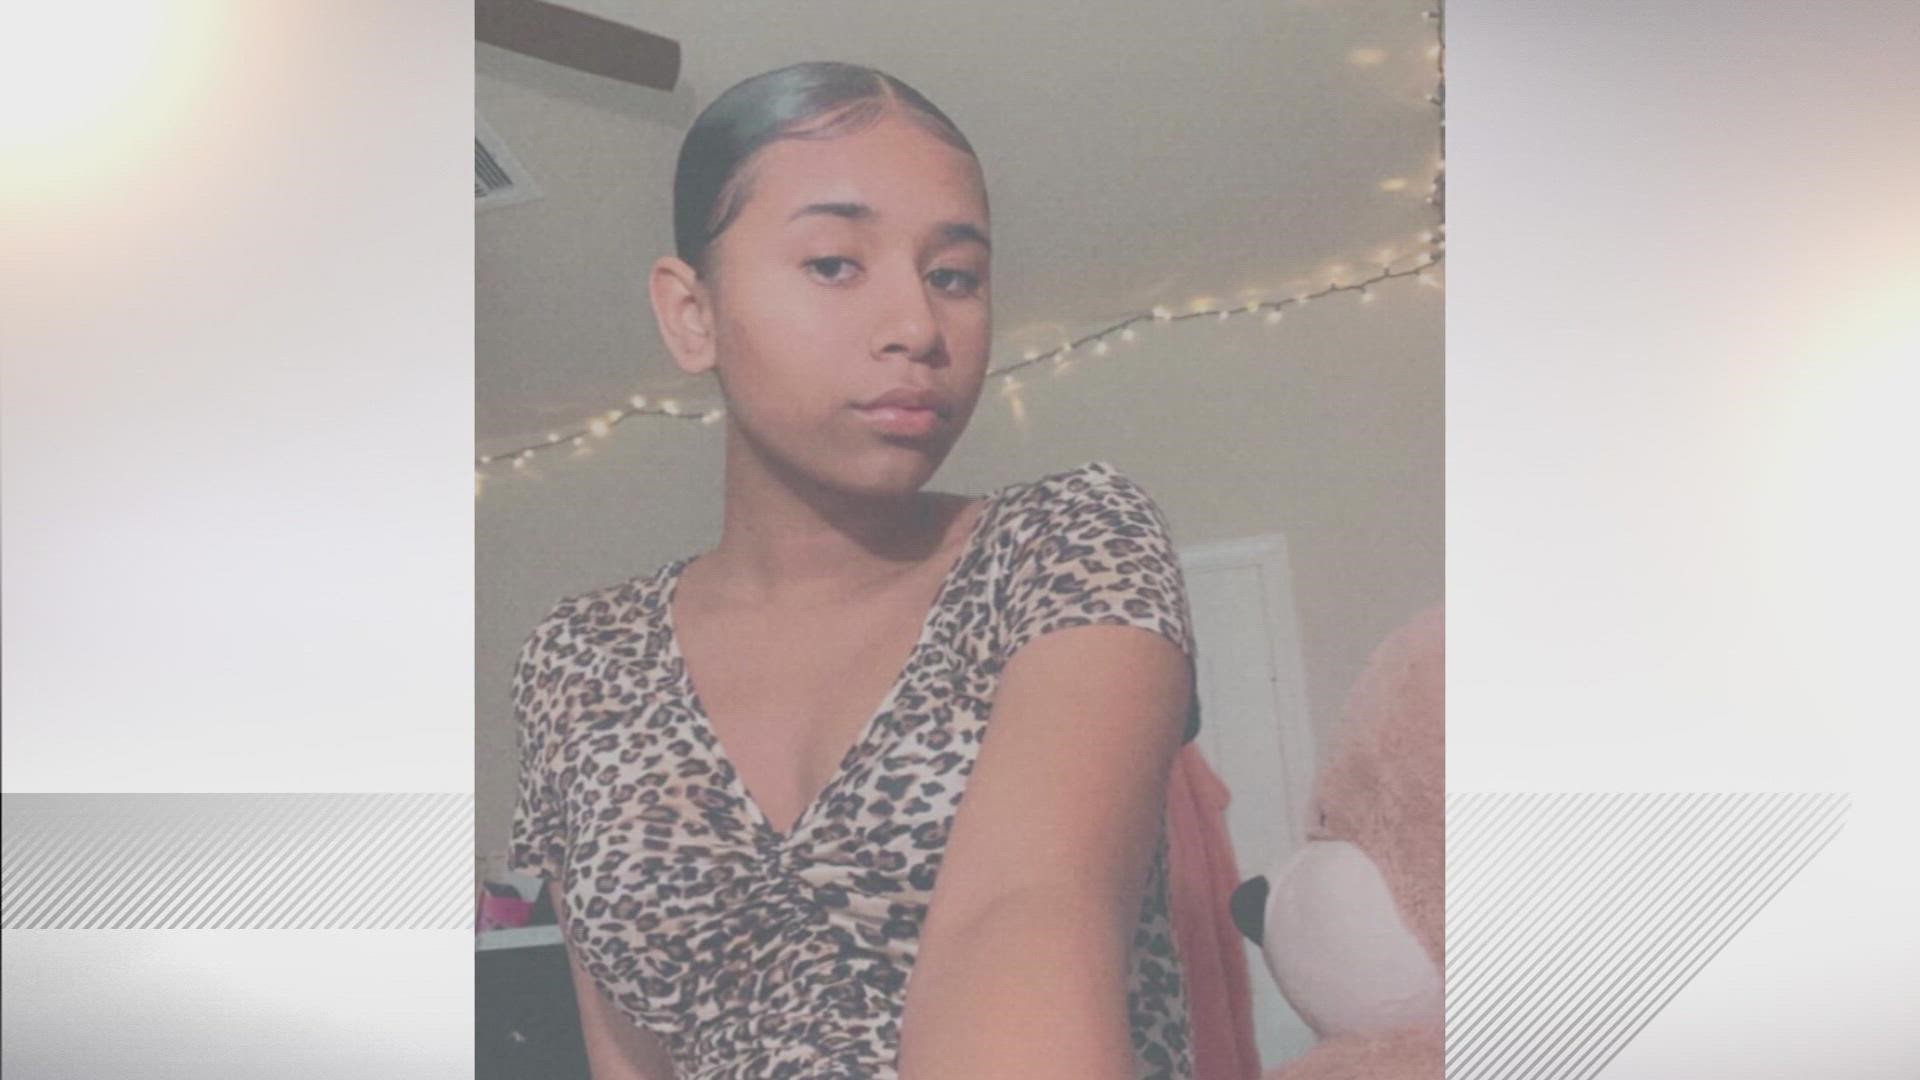 A 16-year-old girl was shot and killed as she was being held captive by her mother’s boyfriend in an Humble-area home early Friday, according to HCSO.